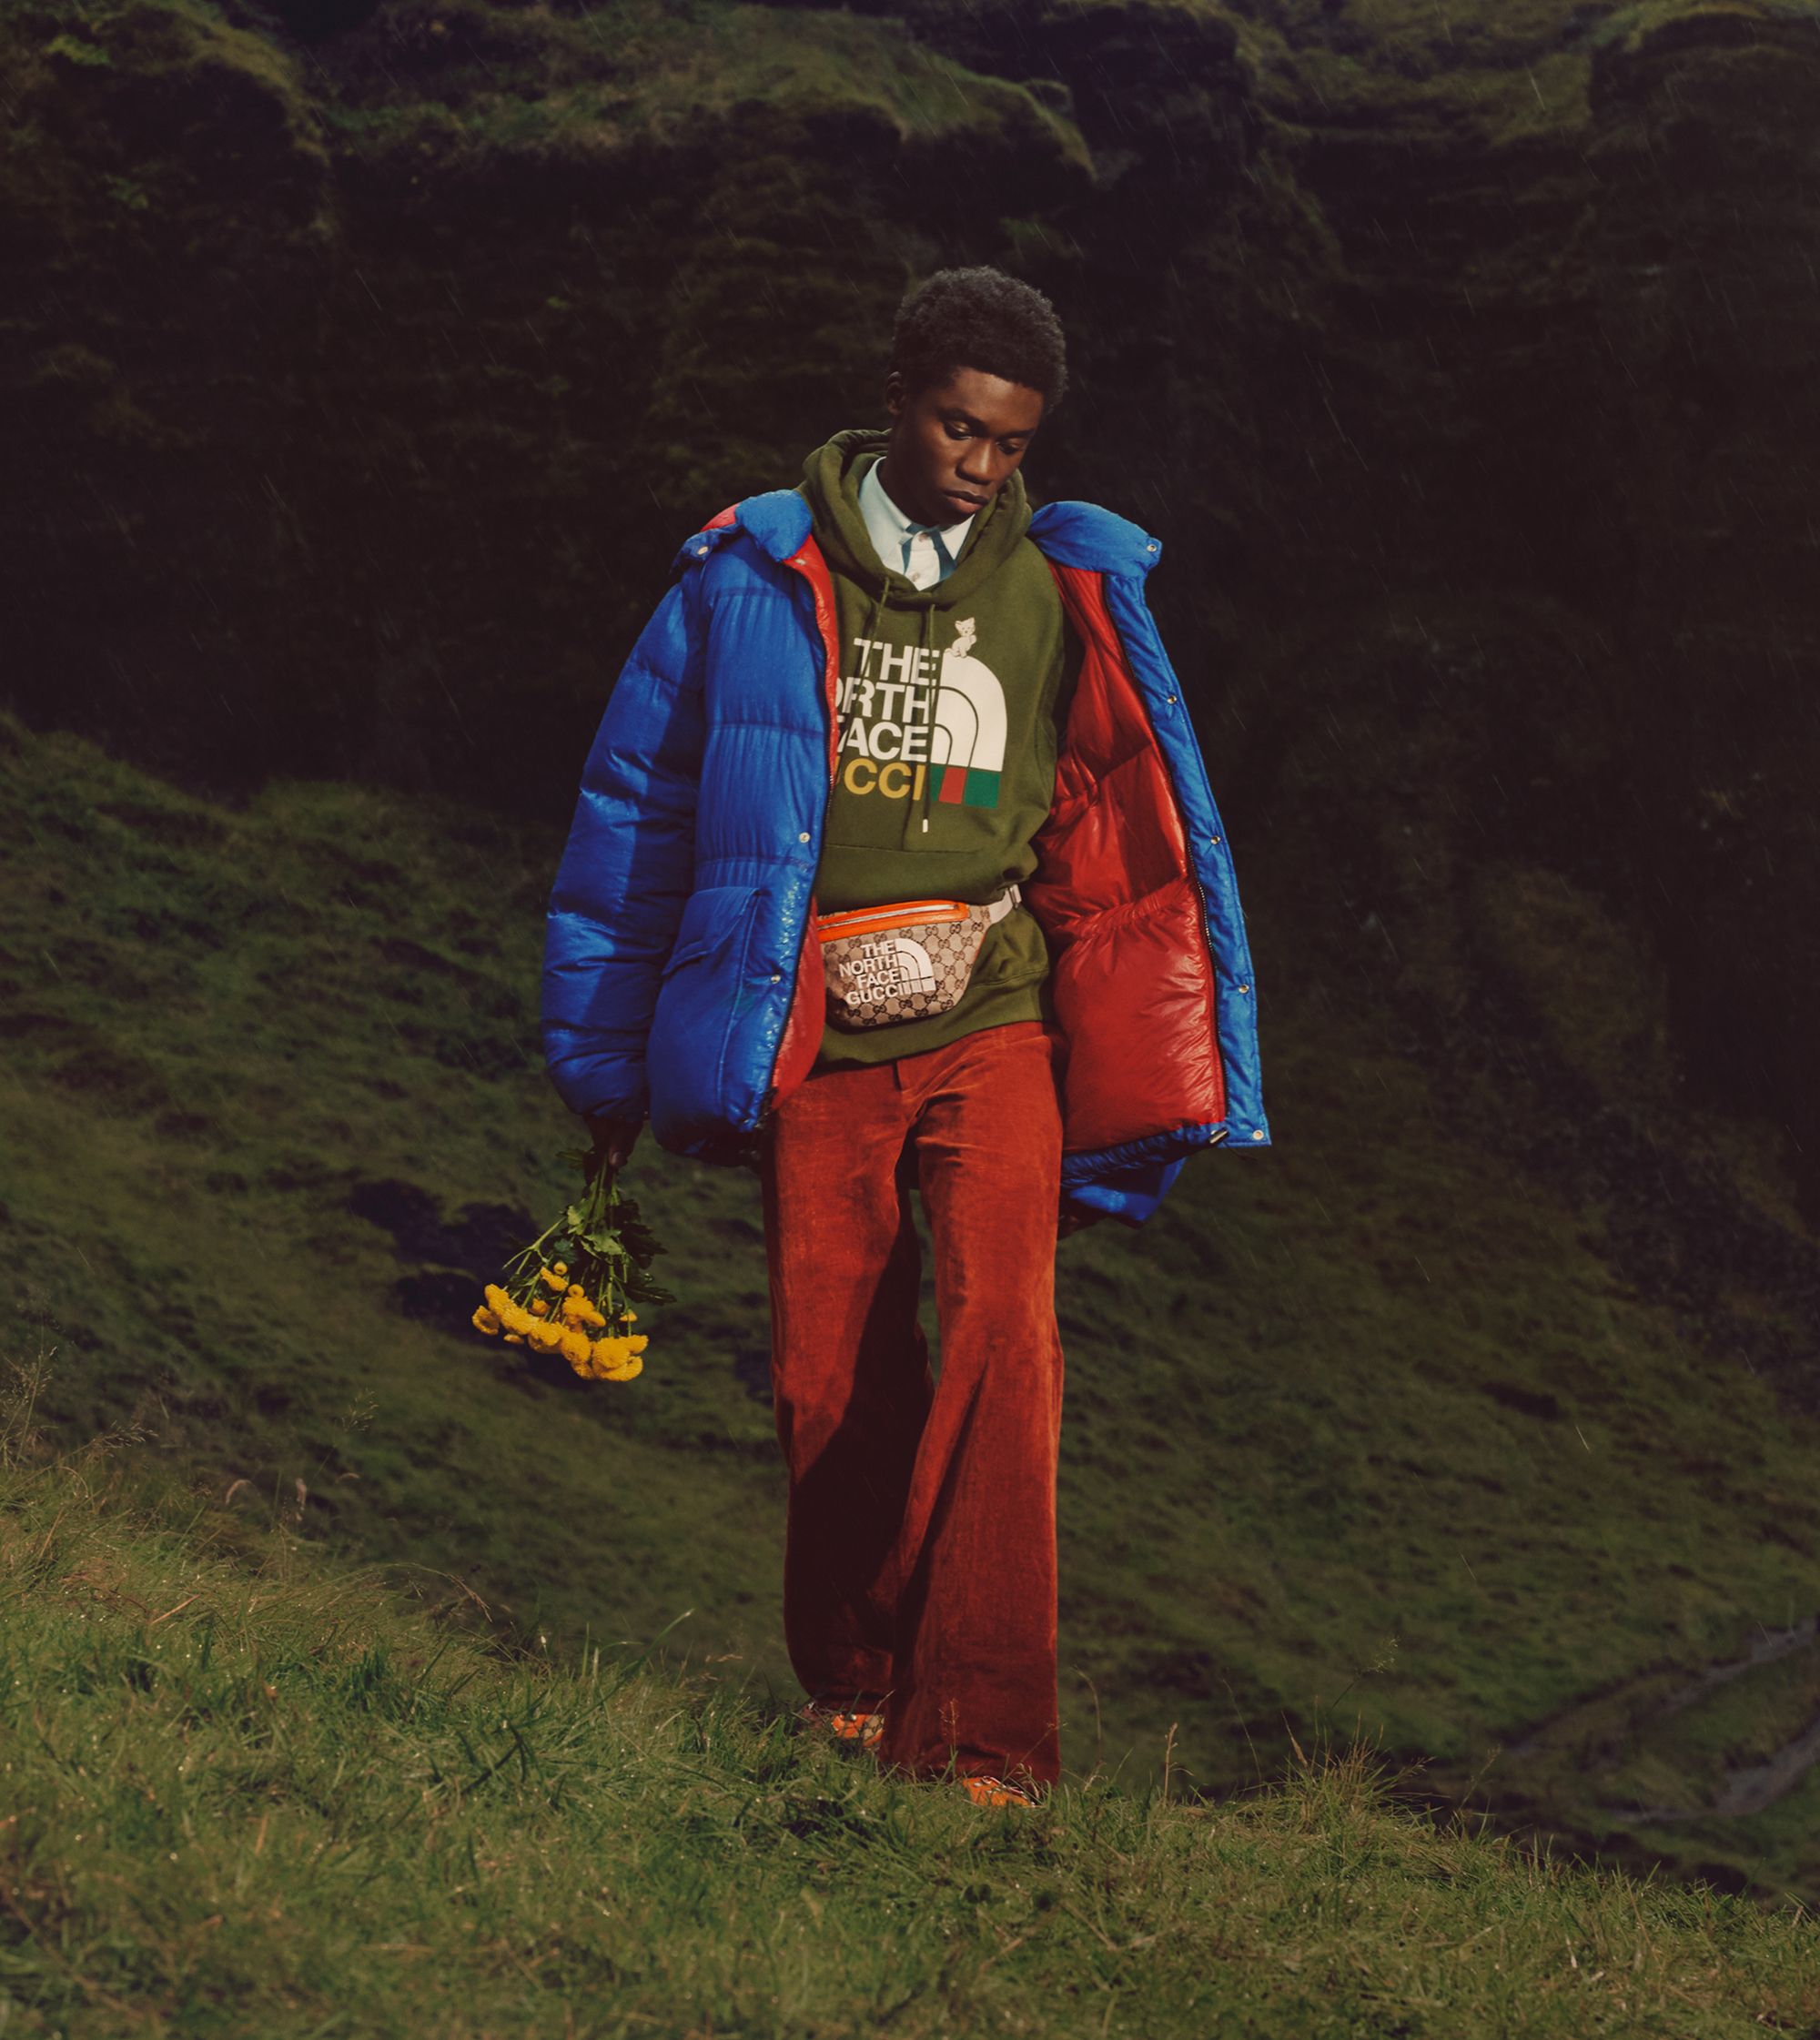 Gucci Announces Collaboration With The North Face